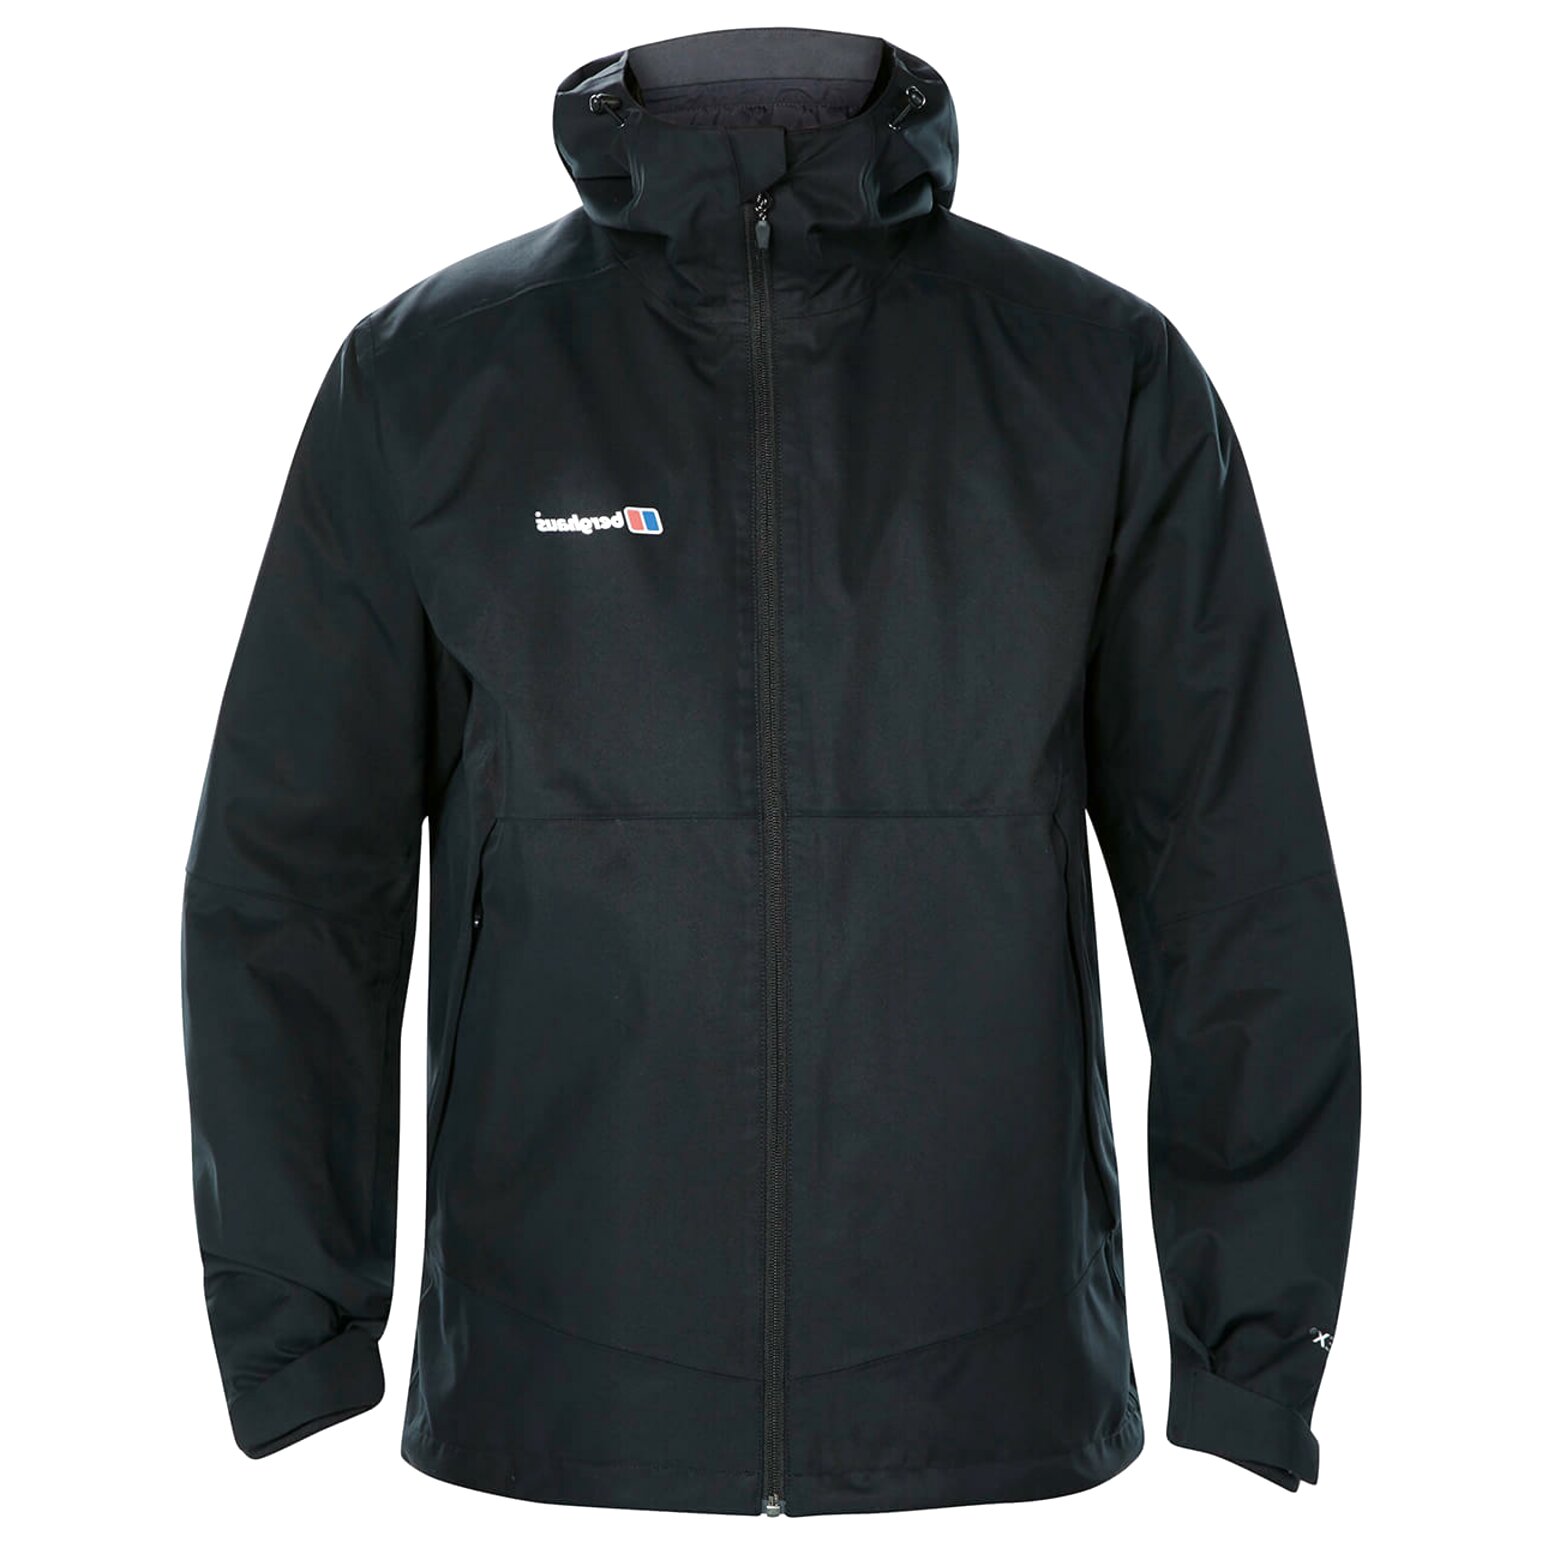 Berghaus 3 1 Jacket for sale in UK | 63 used Berghaus 3 1 Jackets